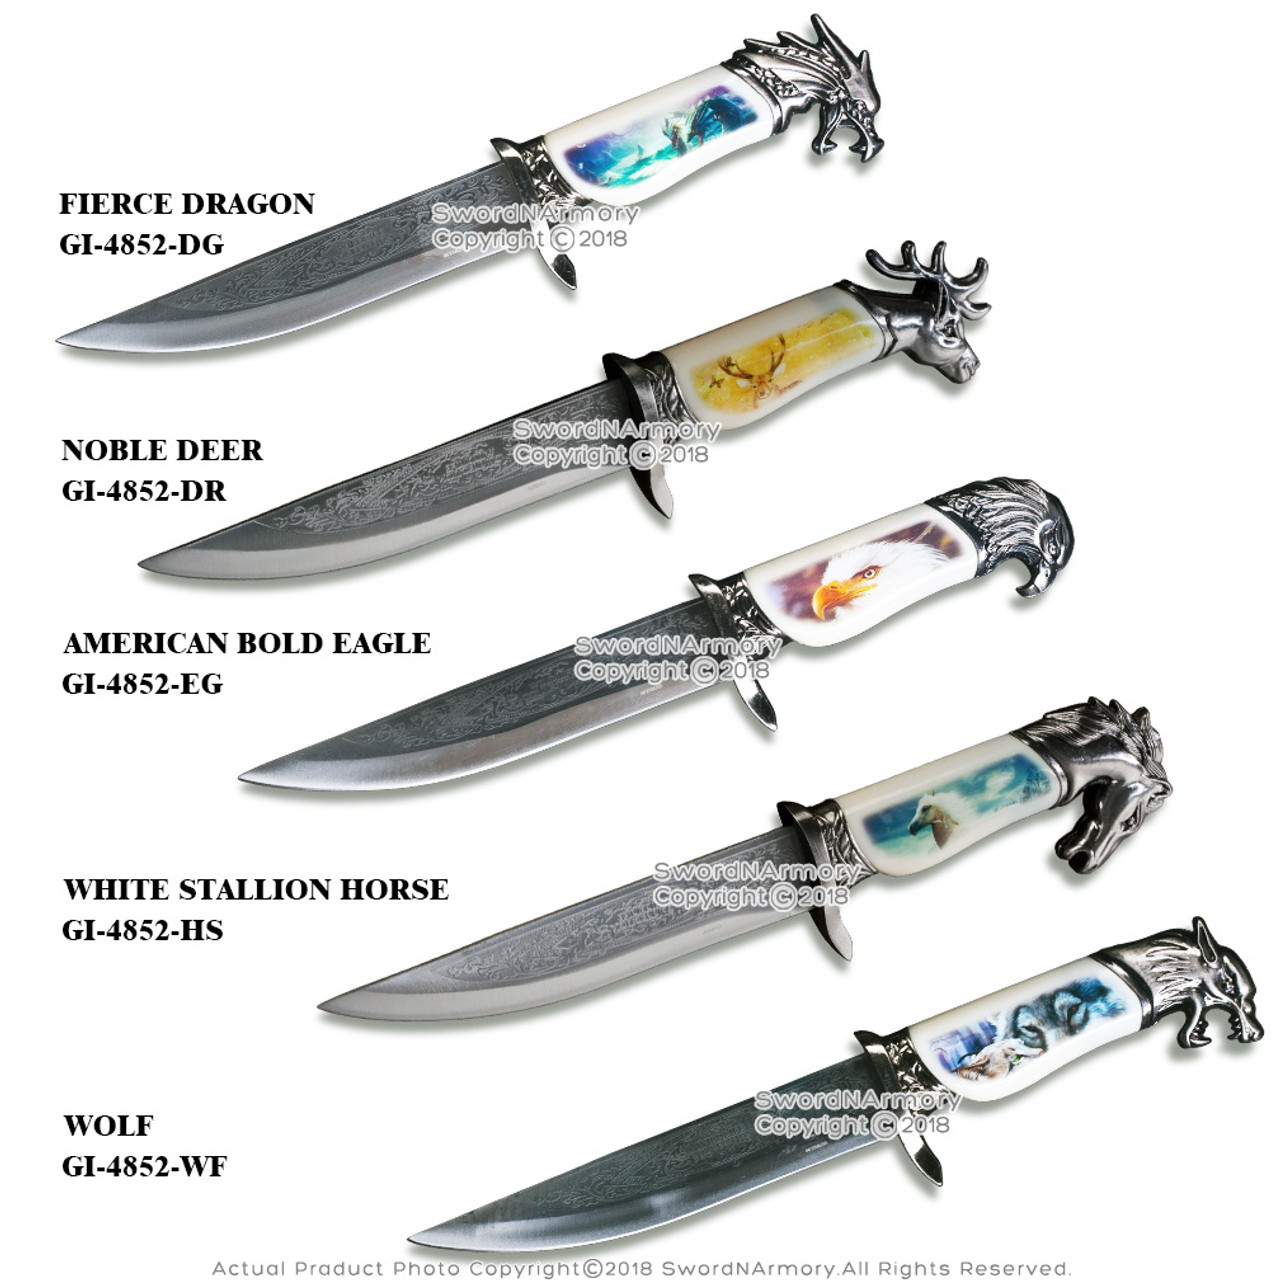 Naval Knife (stainless steel) — horse